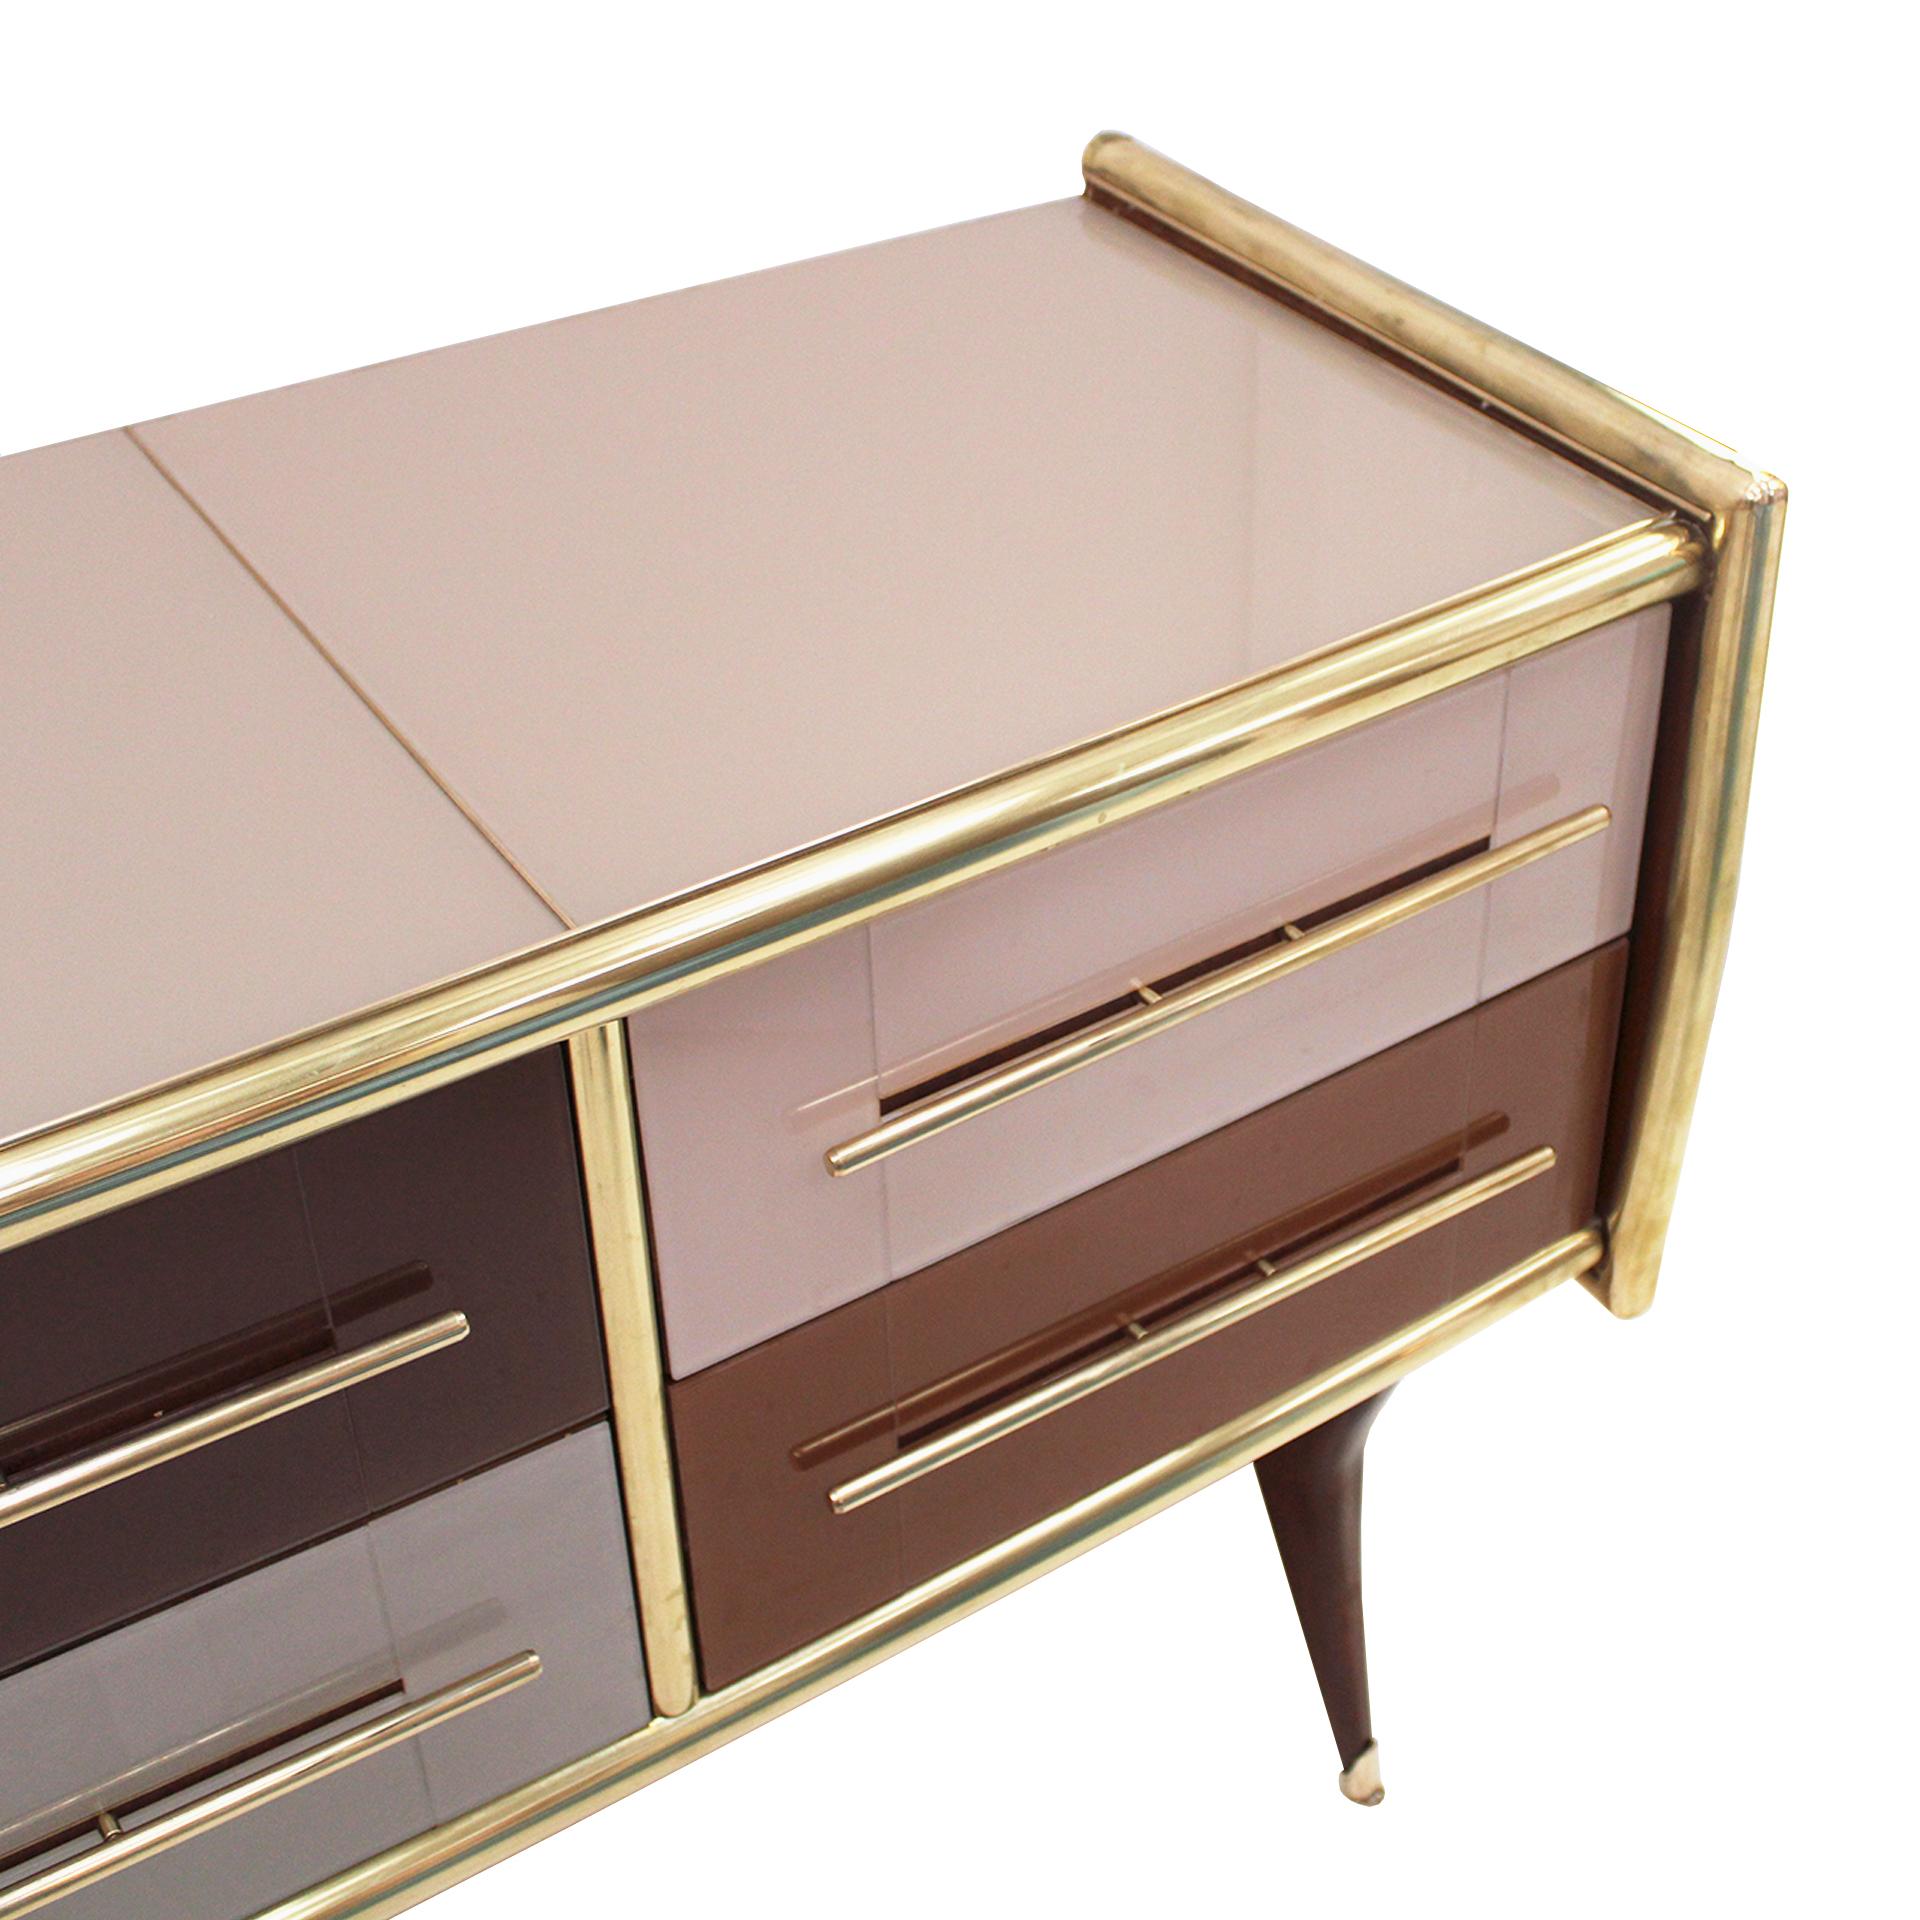 Sideborad comoposed of 6 drawers with original 1950s solid wood structure covered in colored glass. Handles, profiles and legs made of brass. Italy.

Our main target is customer satisfaction, so we include in the price for this item professional and